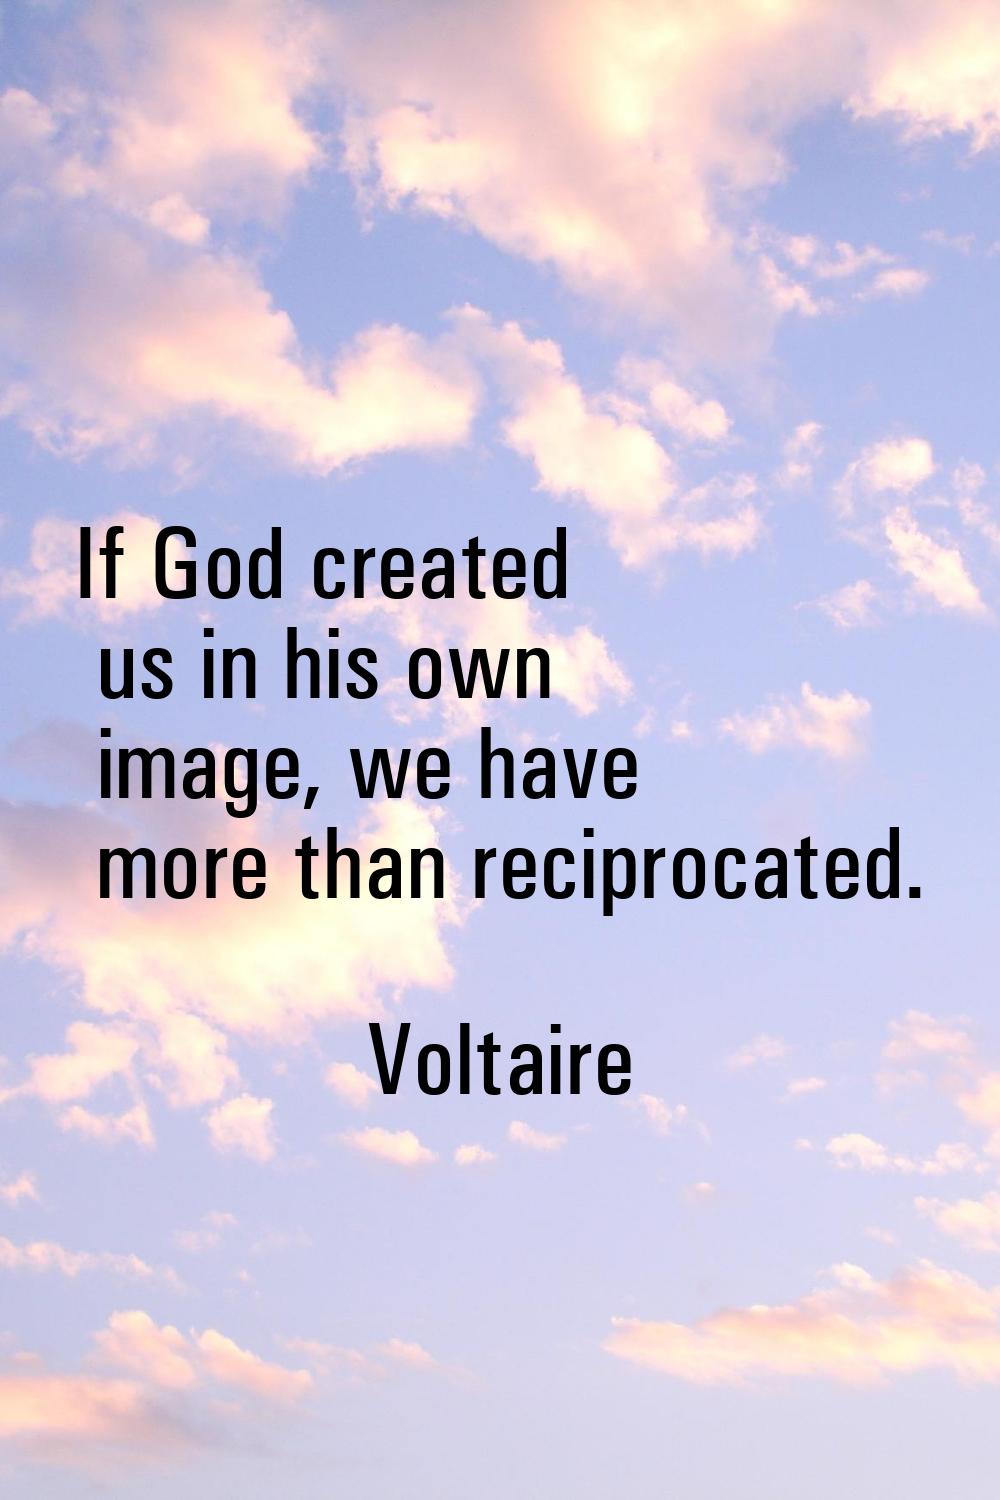 If God created us in his own image, we have more than reciprocated.